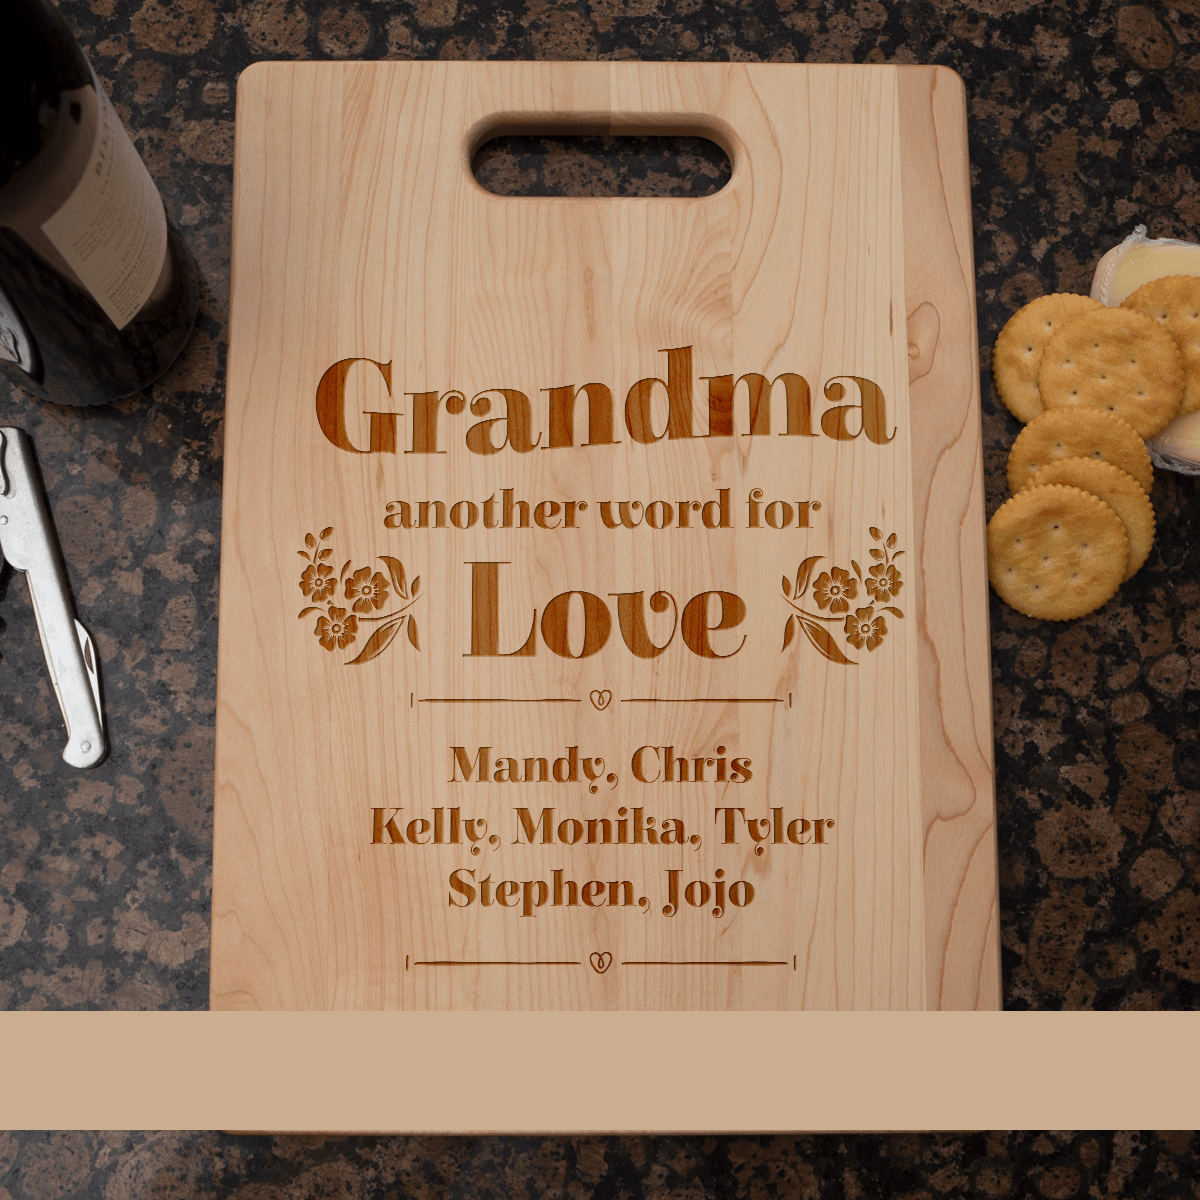 Another Word For Love Cutting Board